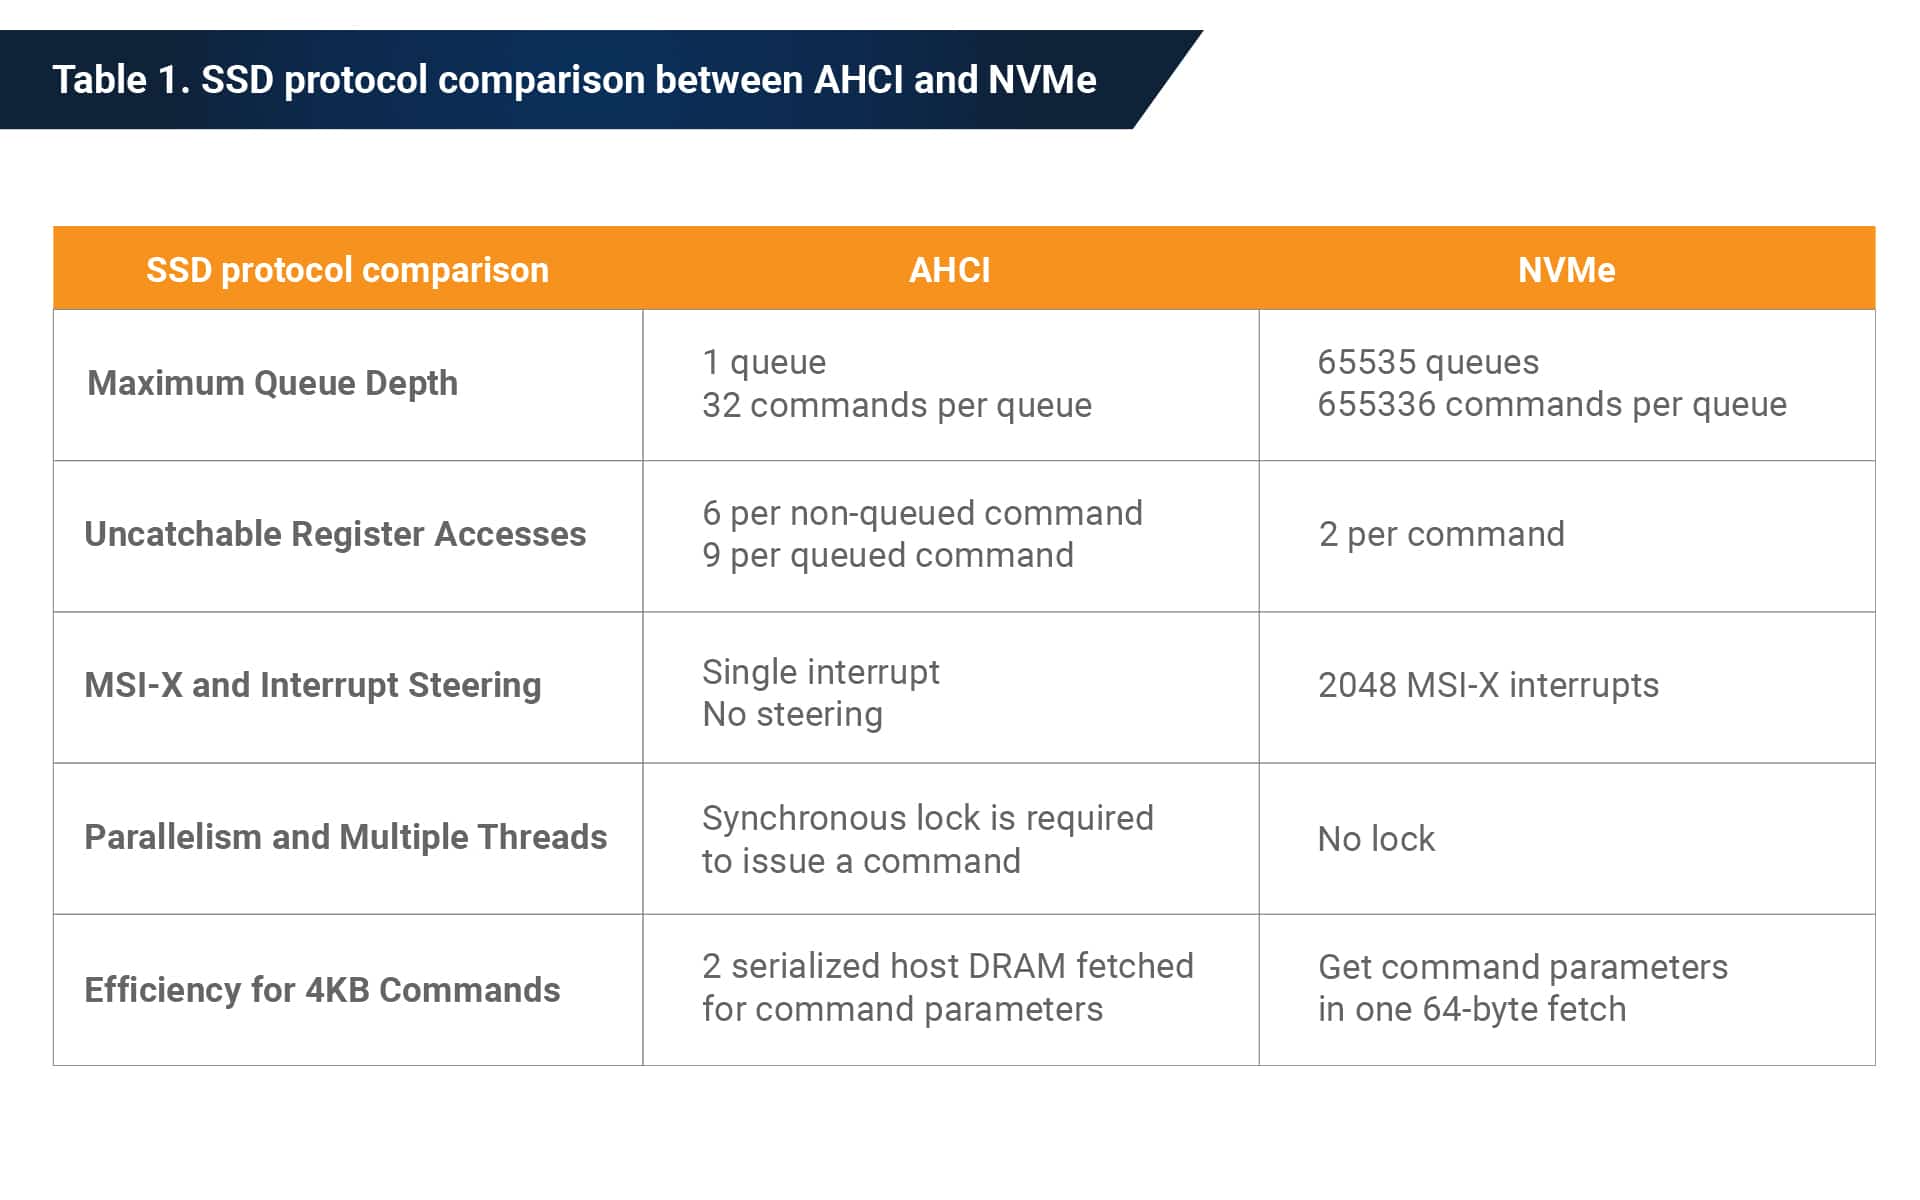 AHCI and NVMe